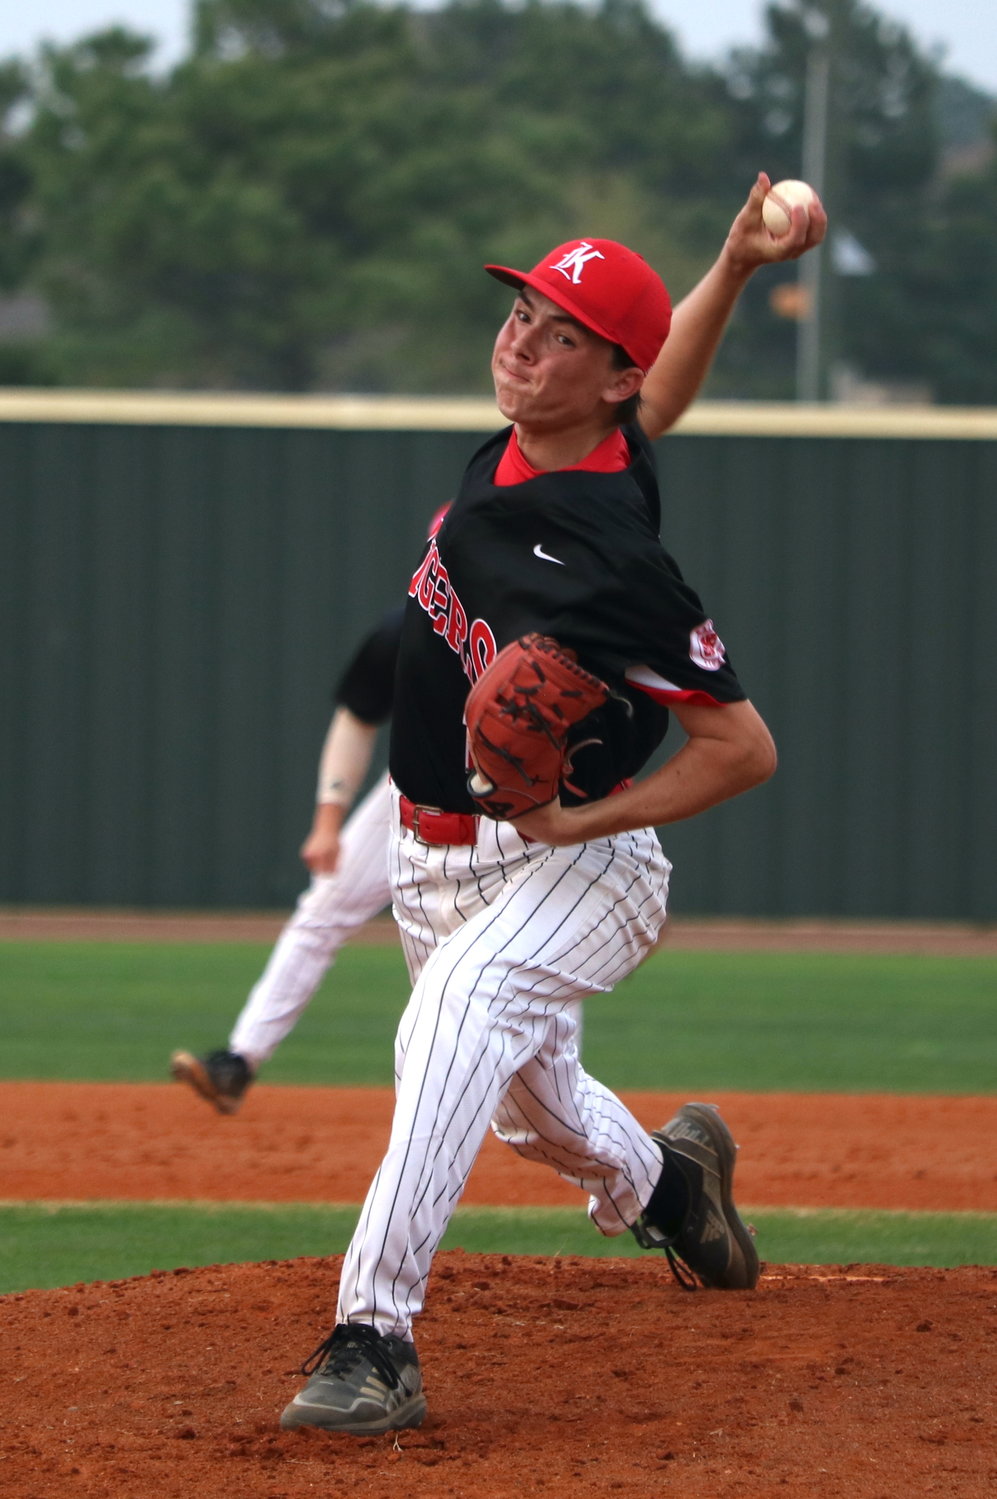 Lucas Moore pitches during a District 19-6A game between Katy and Tompkins at the Tompkins baseball field.